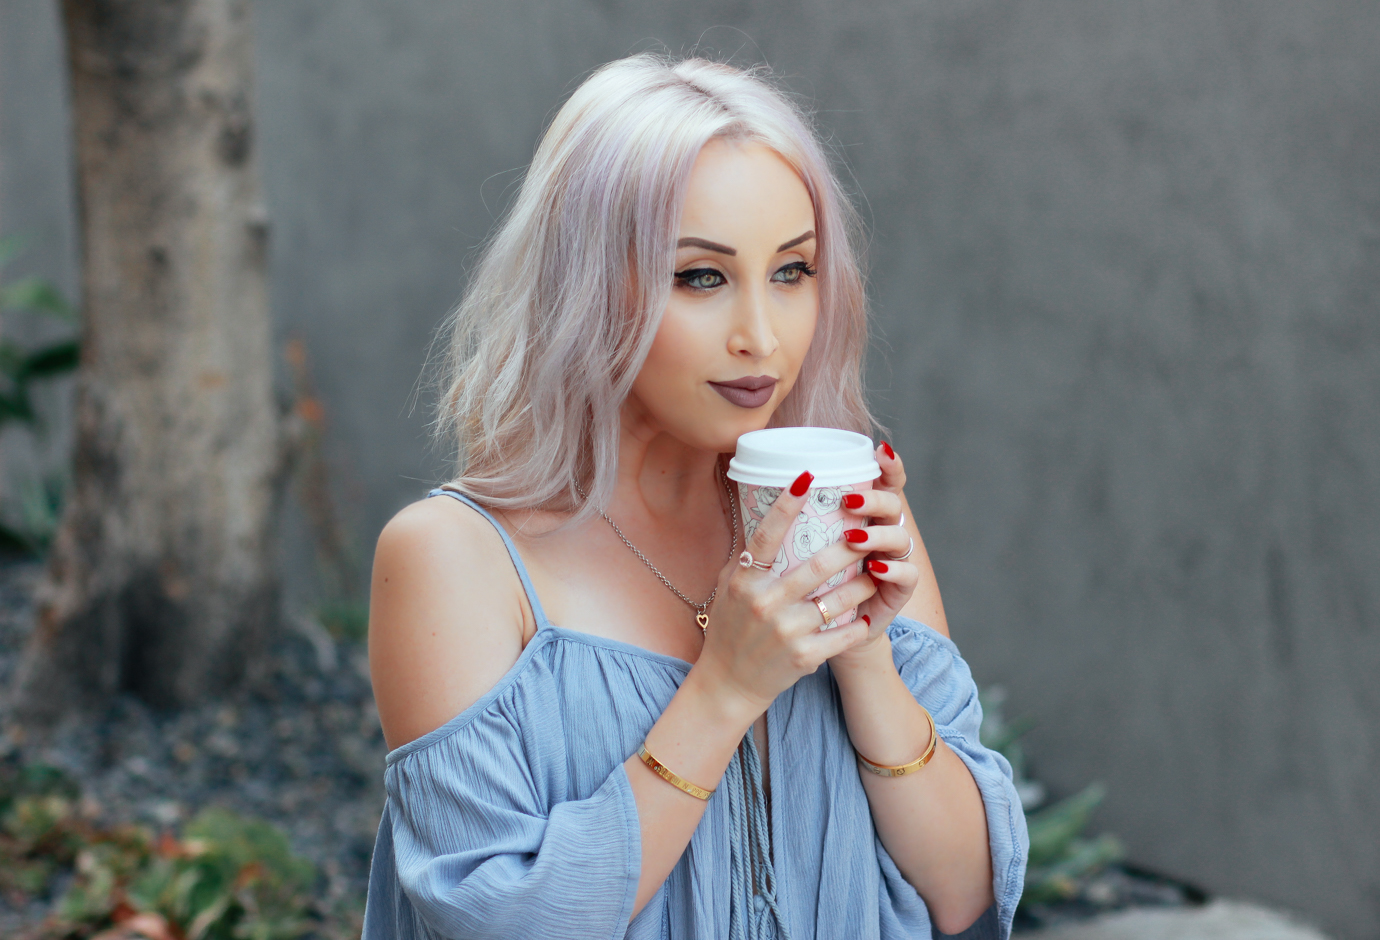 Blondie in the City | Light Blue Tassel Top @windsorstore | Casual Street Style | Alfred Tea Room in West Hollywood | Lip Color: Trap by @ColourPopCo